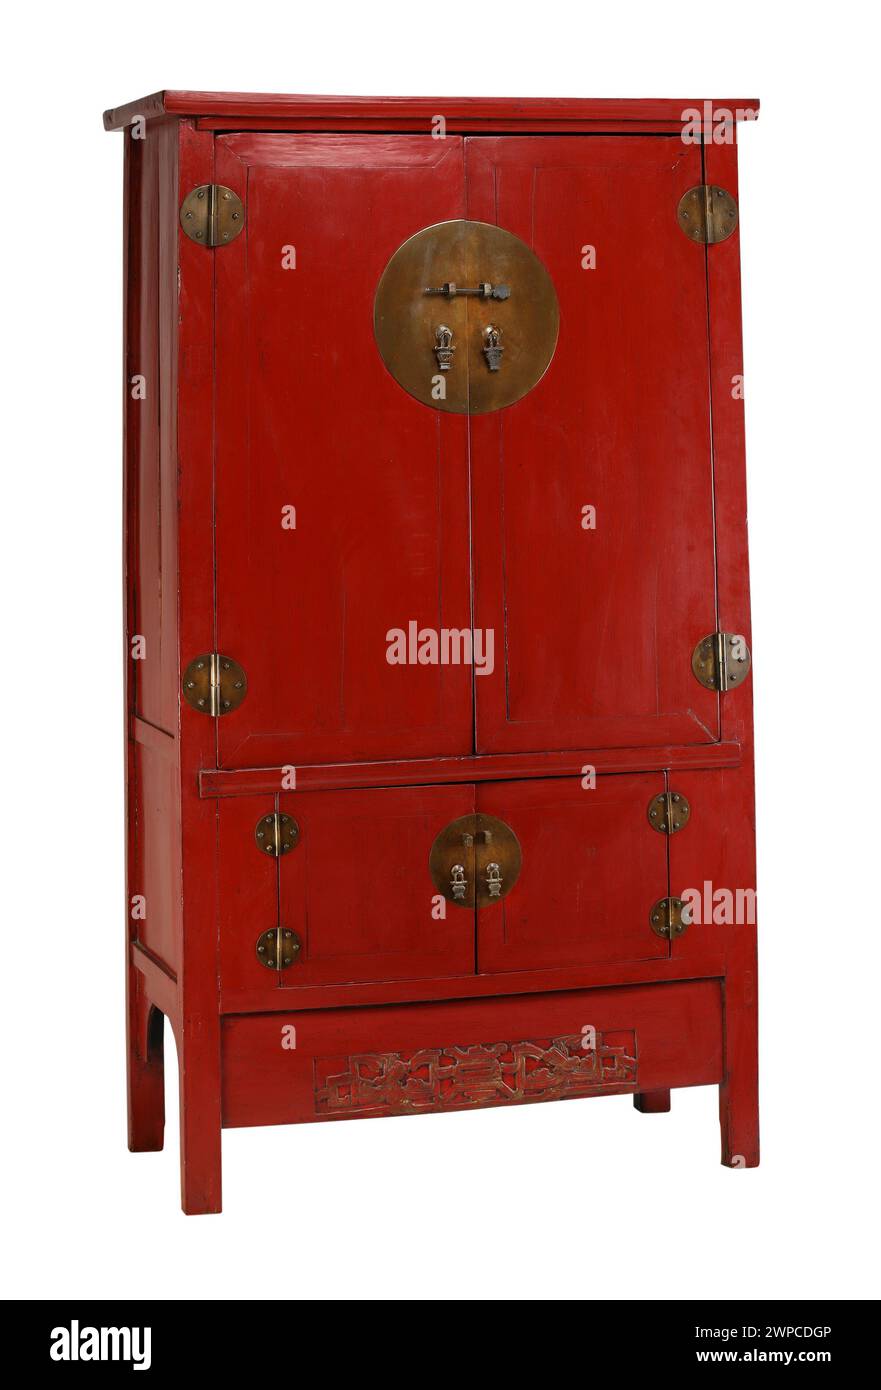 Red Chinese storage cabinet with clipping path. Stock Photo